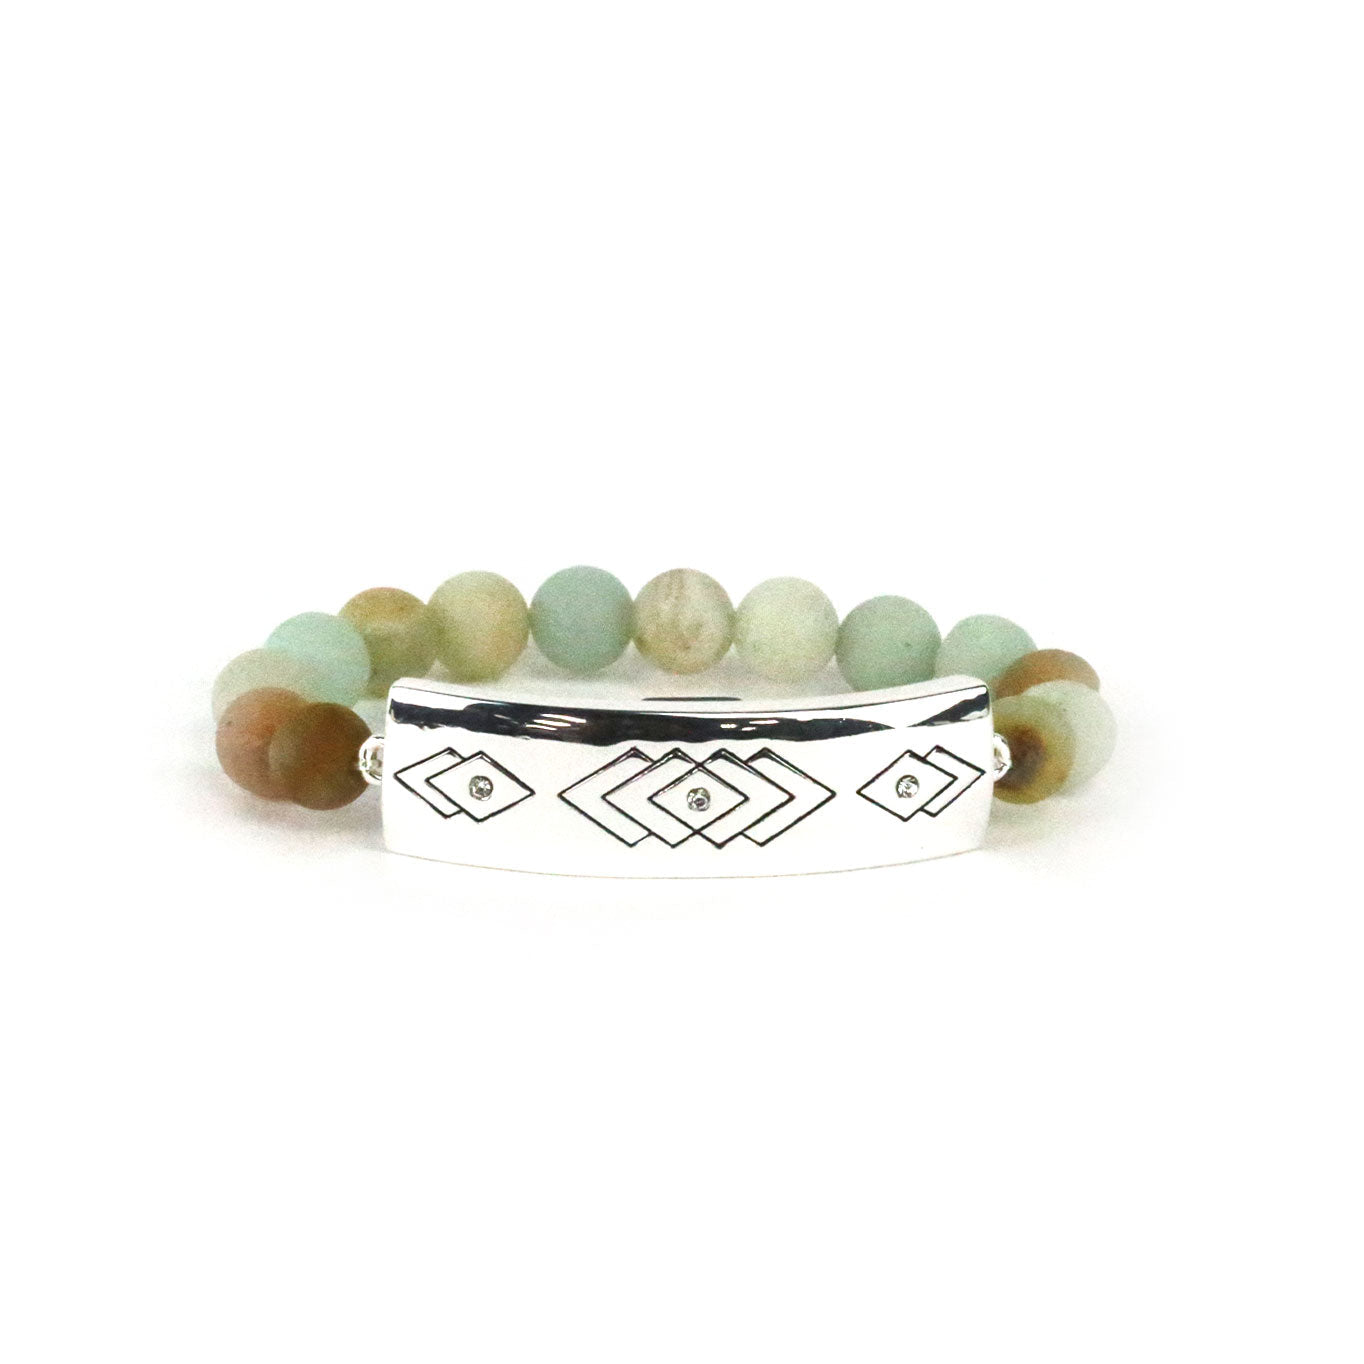 Return to Tiffany™ Heart Tag Bead Bracelet in Silver with Amazonite, 8 mm |  Tiffany & Co.